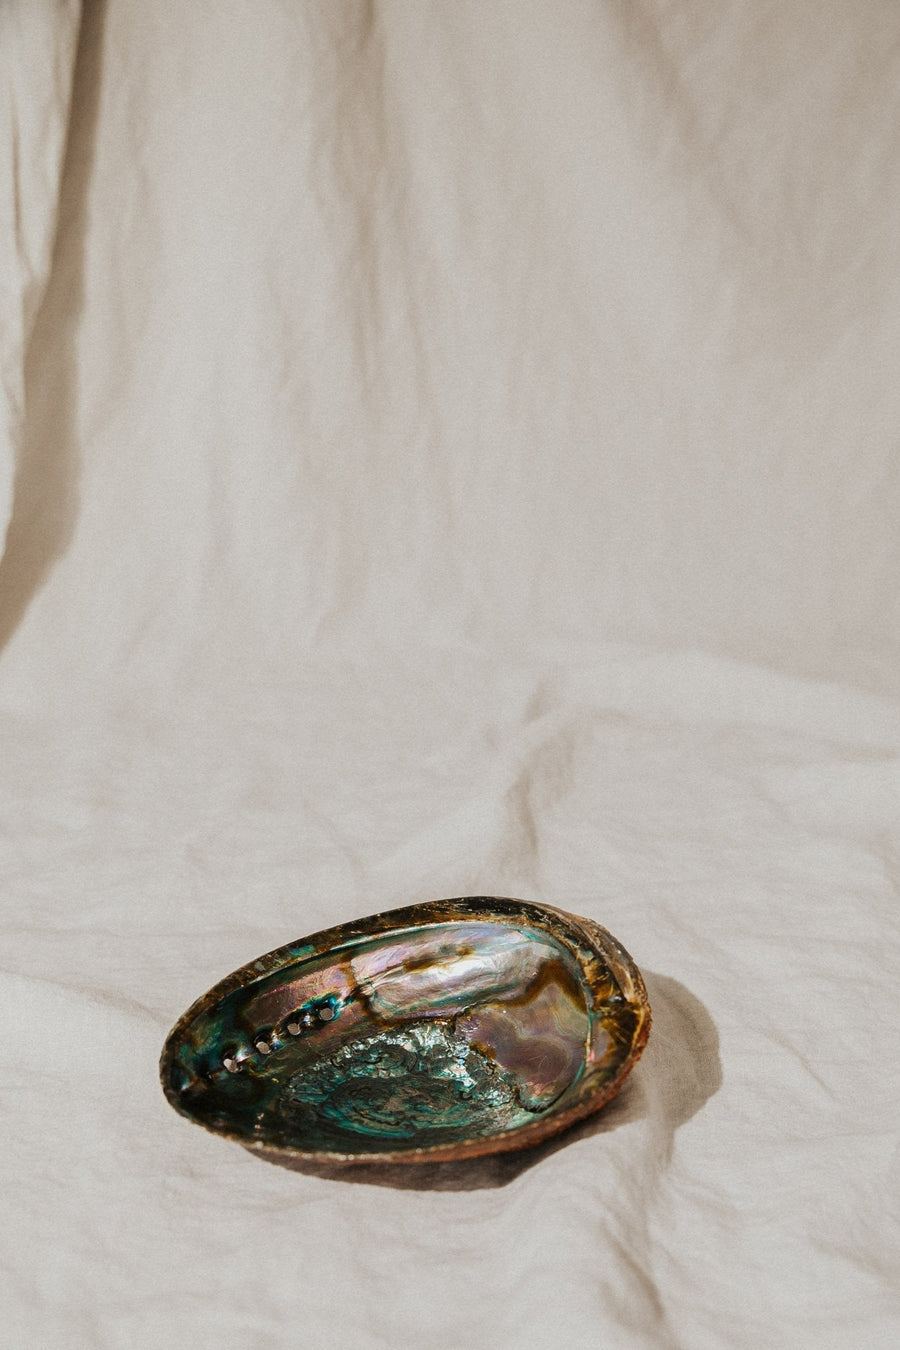 om imports Objects Treasured Things Abalone Offering Bowl